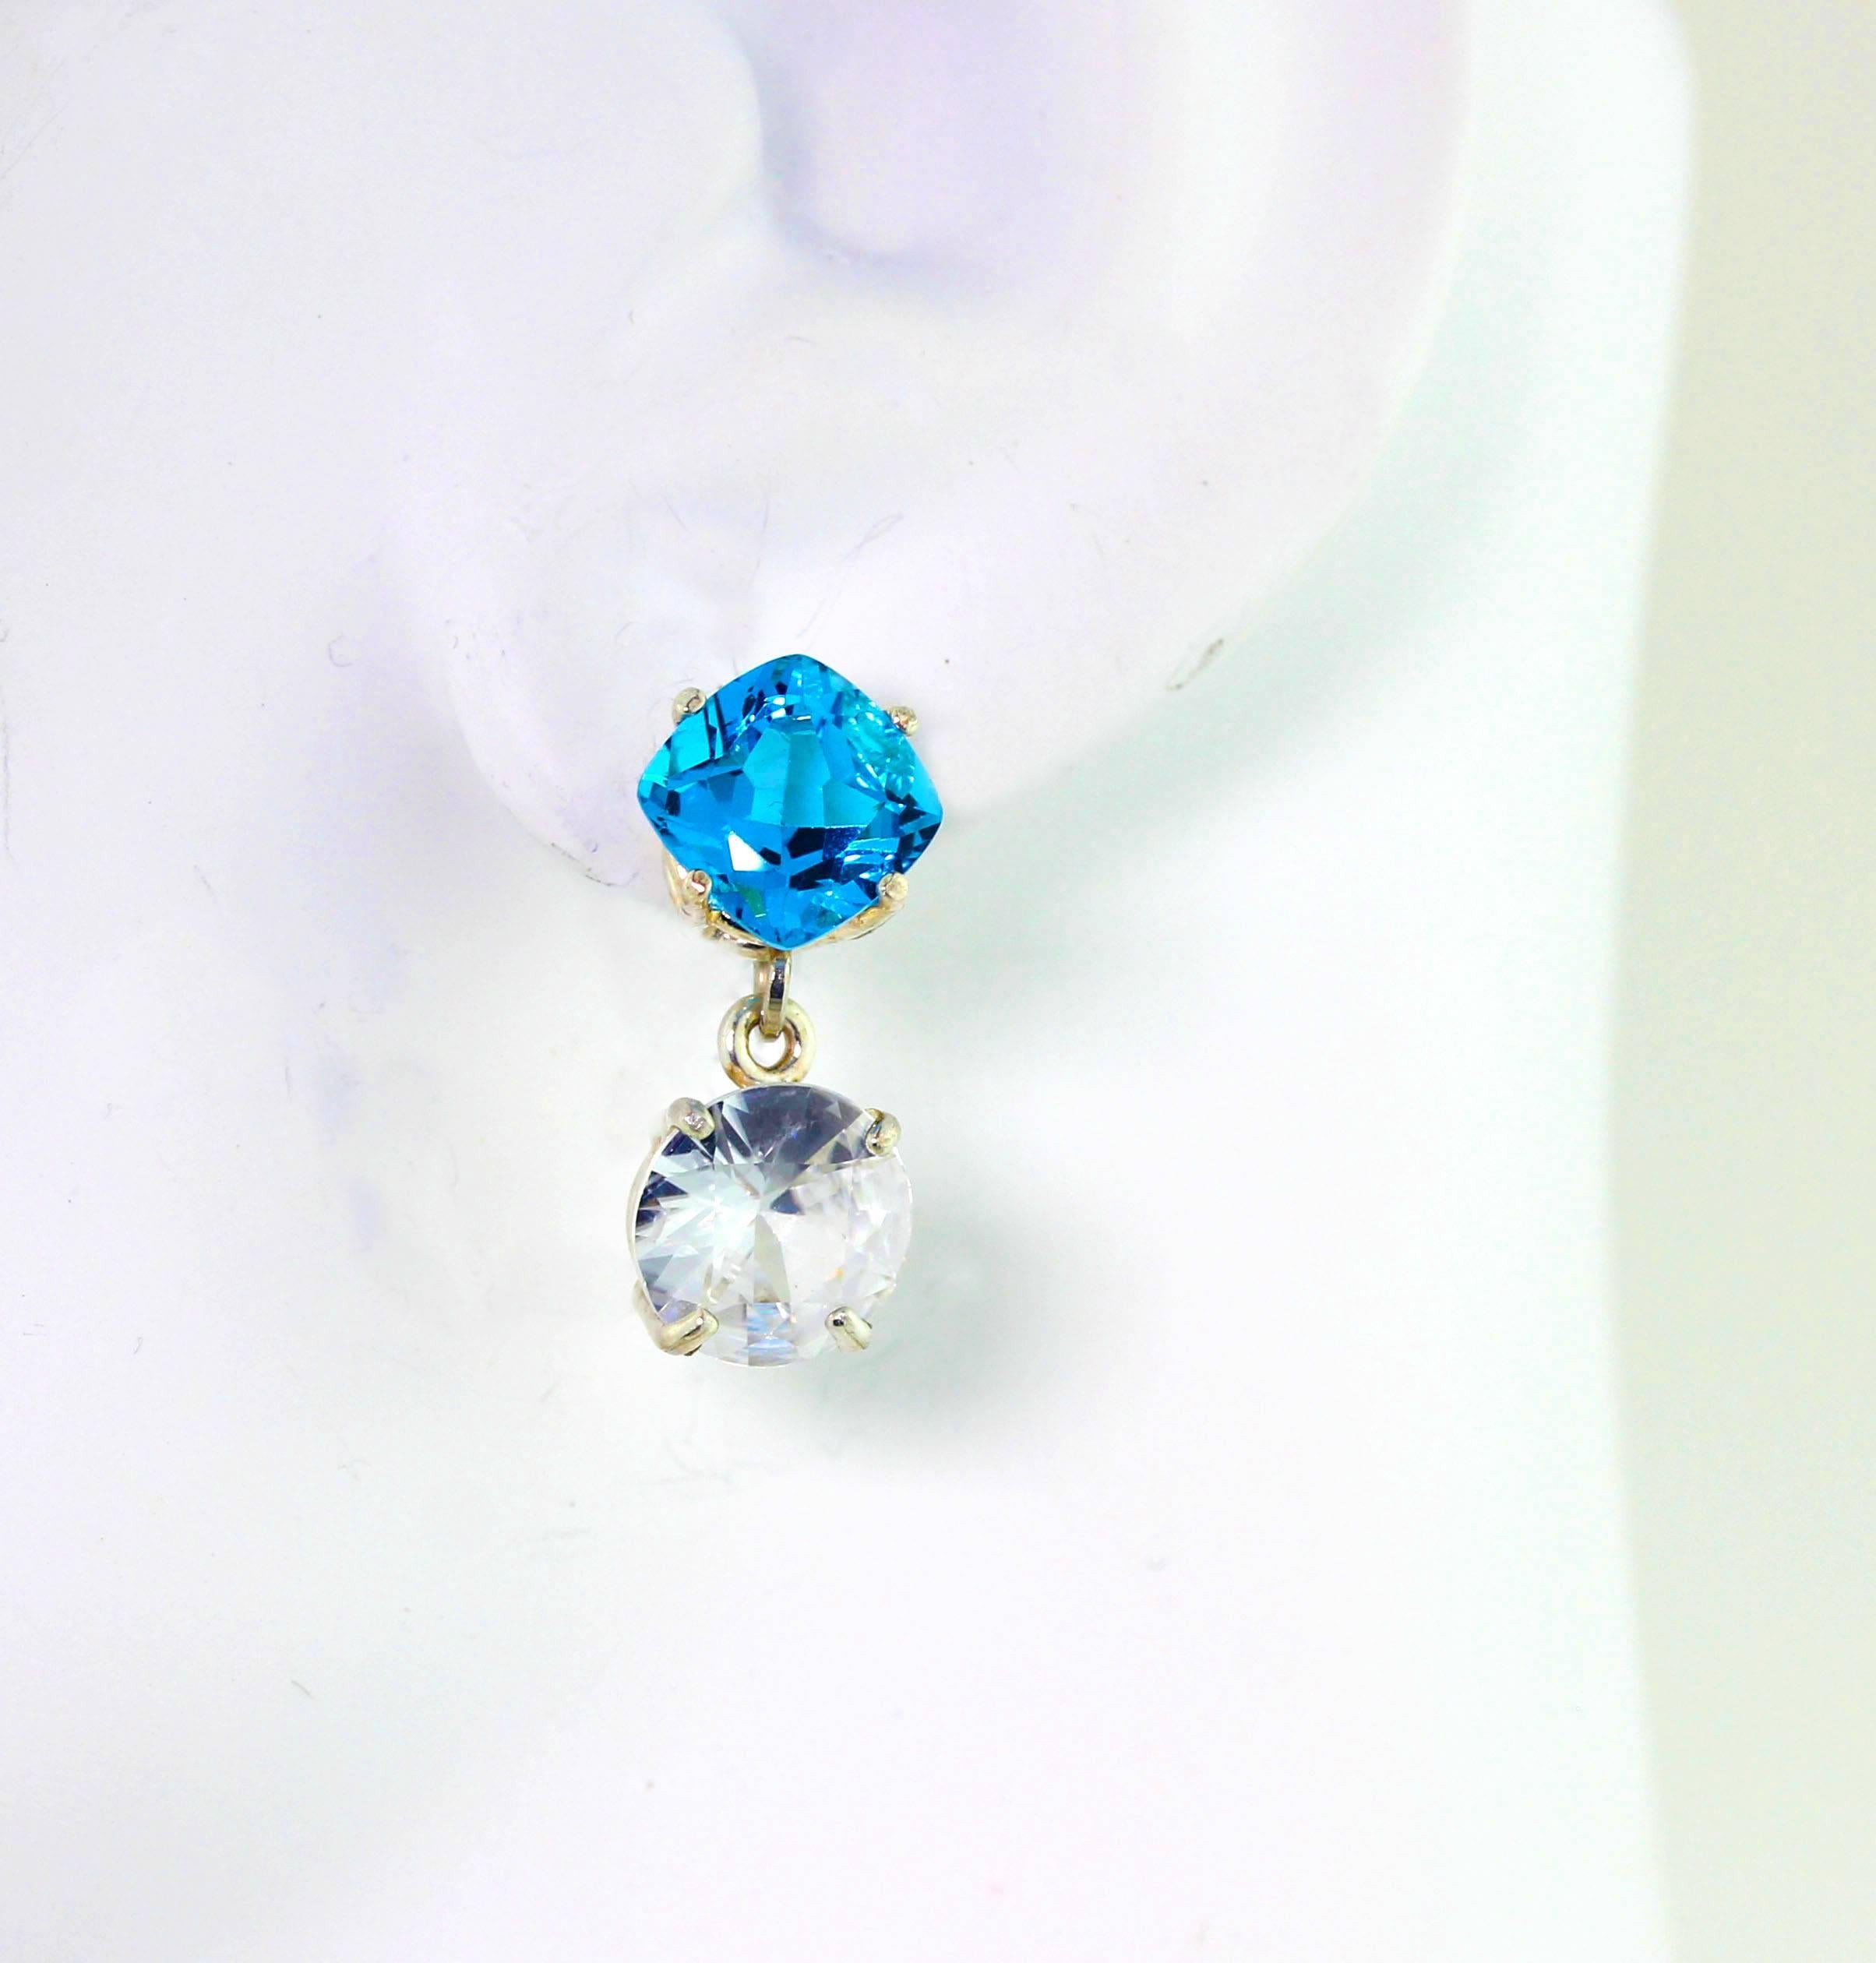 3.72 carats each of glittering round brilliant white Cambodian Zircons (9 mm) swing happily and super elegantly from these 2.61 carats each of glamorous glistening blue cushion cut Topaz (8 mm x 8 mm) set in sterling silver stud earrings. They hang